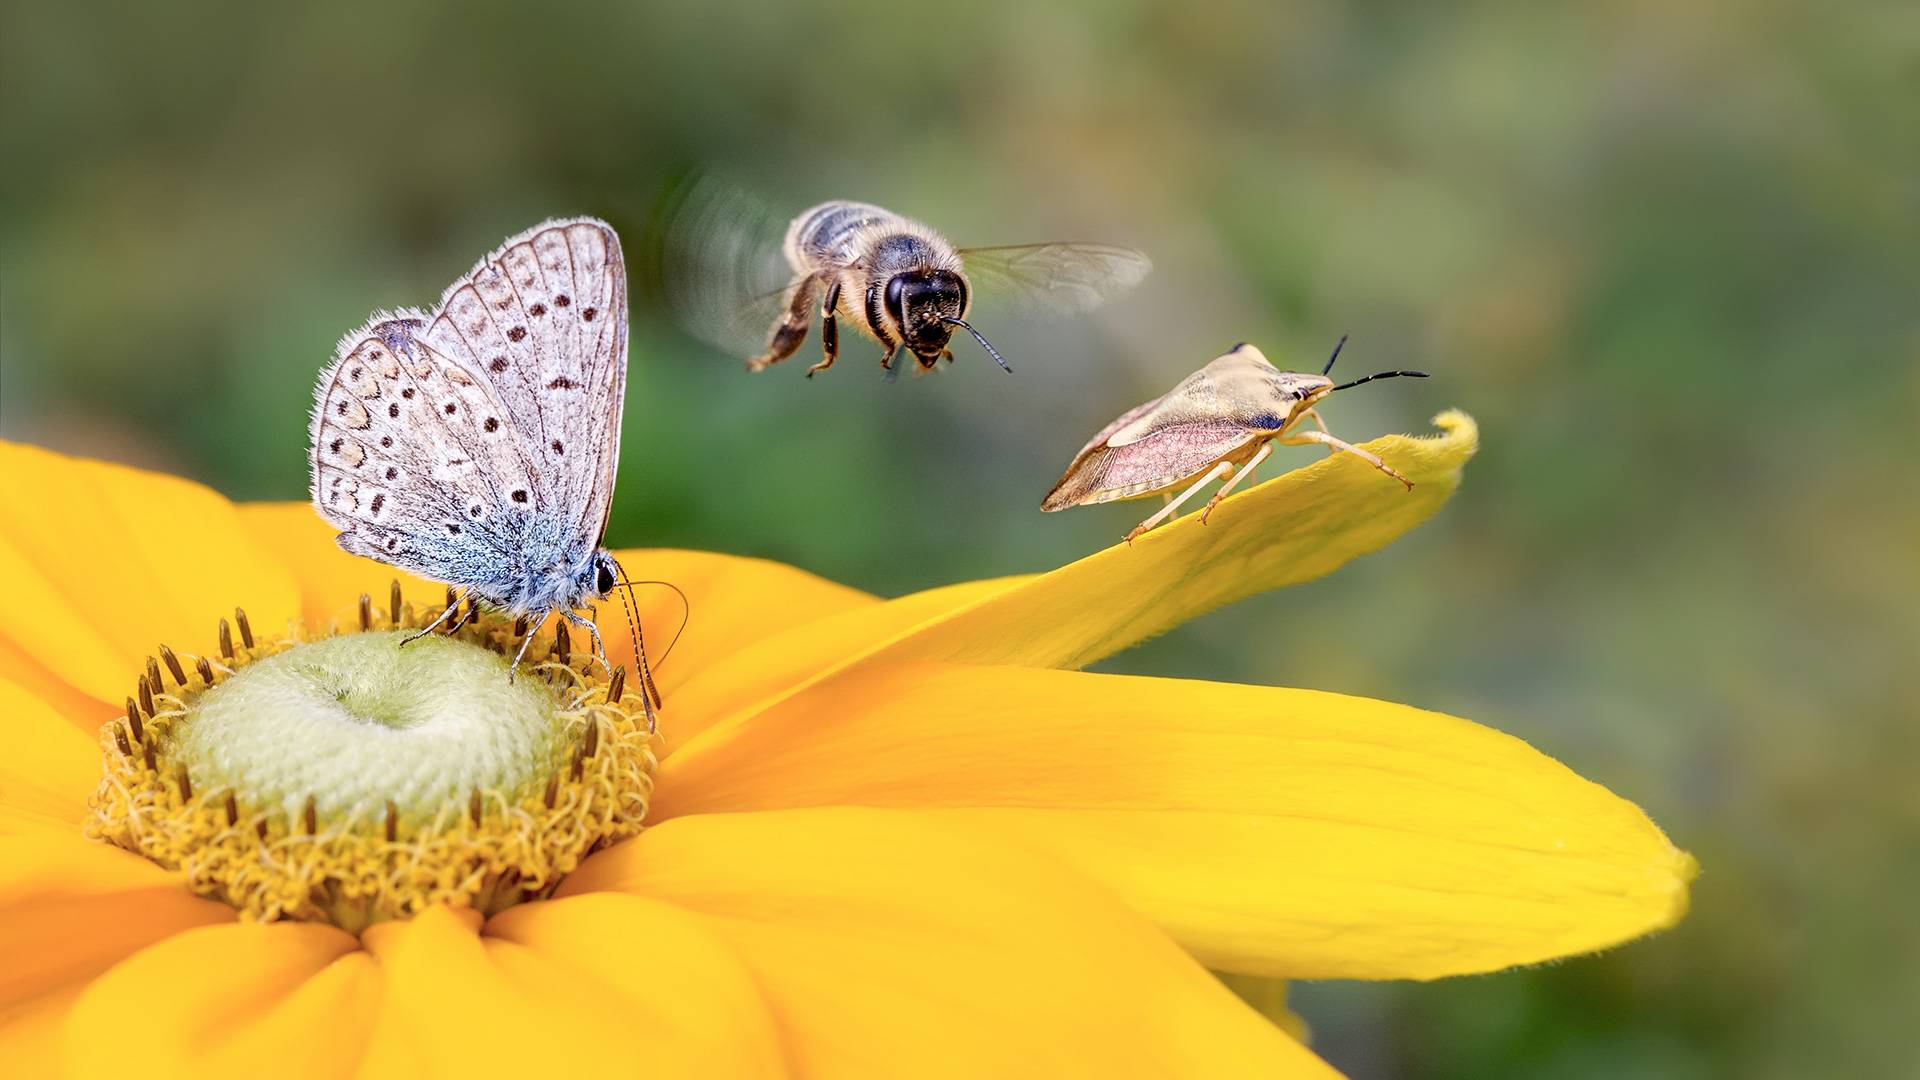 Bee hovering above bright golden flower which has one moth with folded in wings on petak, and another with wings up standing on flowers center disc